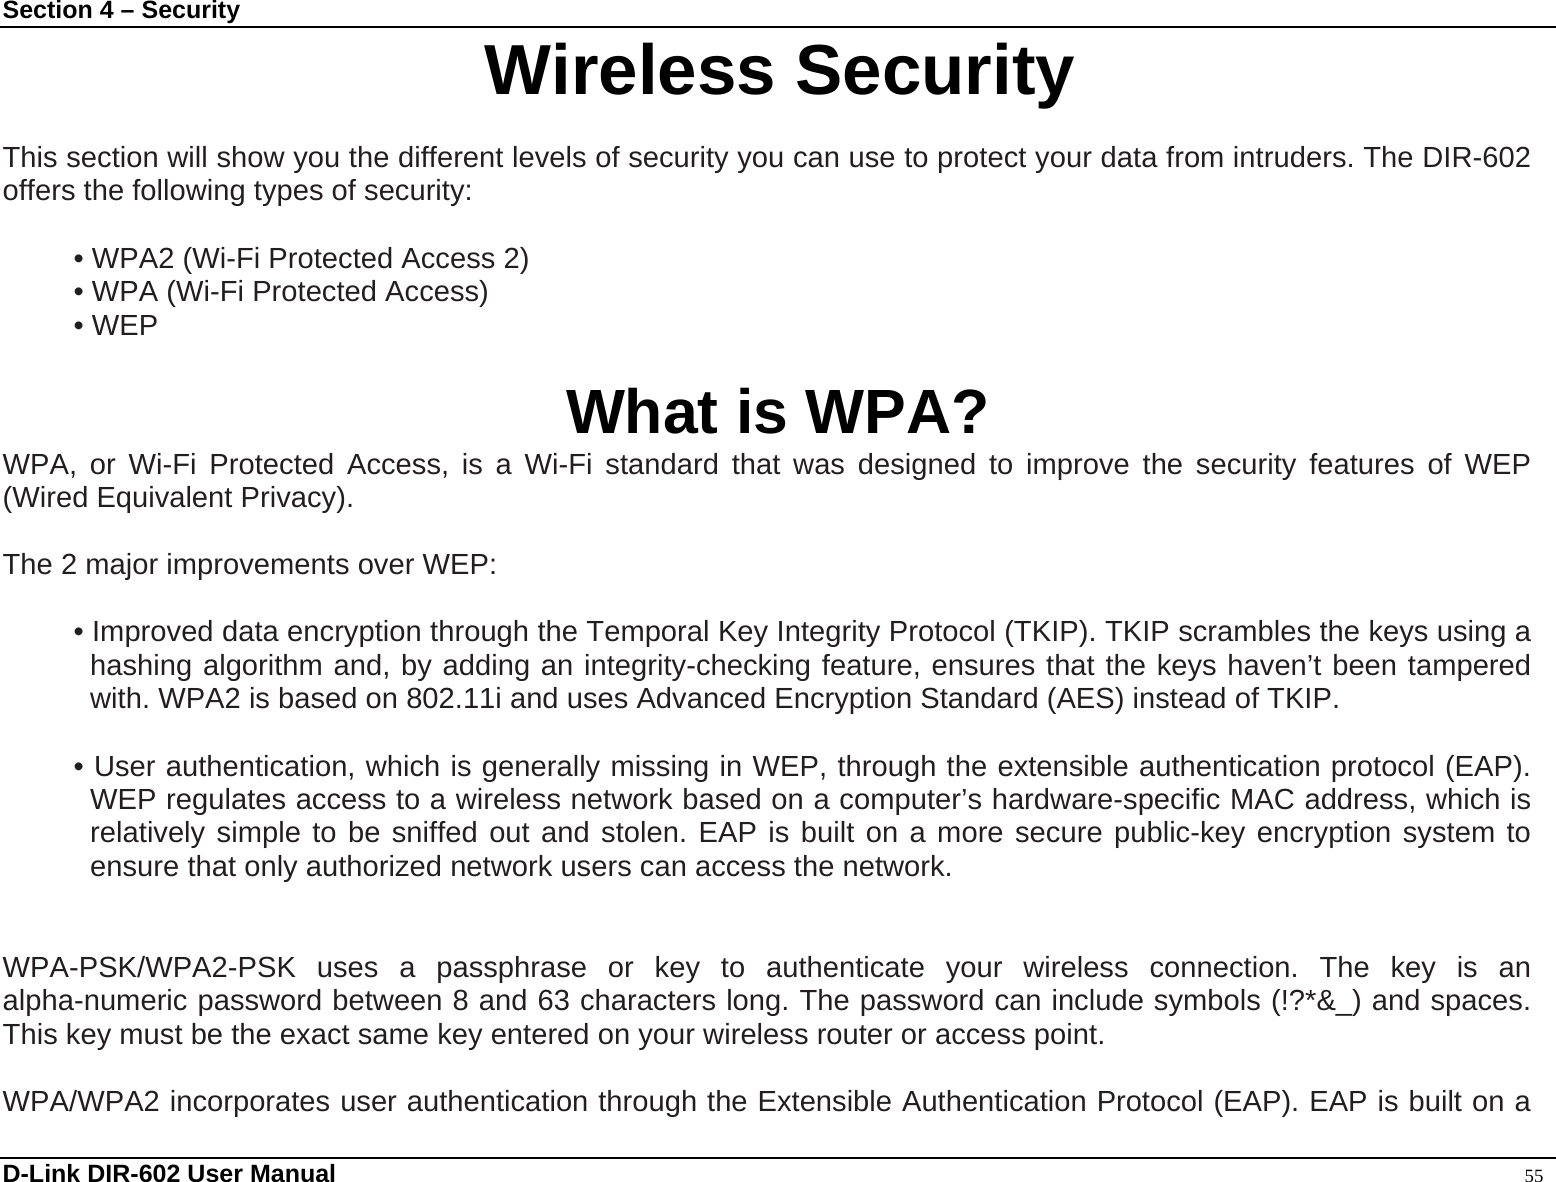 Section 4 – Security  D-Link DIR-602 User Manual                                                                                               55 InterWireless Security  This section will show you the different levels of security you can use to protect your data from intruders. The DIR-602 offers the following types of security:  • WPA2 (Wi-Fi Protected Access 2) • WPA (Wi-Fi Protected Access) • WEP  What is WPA? WPA, or Wi-Fi Protected Access, is a Wi-Fi standard that was designed to improve the security features of WEP (Wired Equivalent Privacy).     The 2 major improvements over WEP:    • Improved data encryption through the Temporal Key Integrity Protocol (TKIP). TKIP scrambles the keys using a hashing algorithm and, by adding an integrity-checking feature, ensures that the keys haven’t been tampered with. WPA2 is based on 802.11i and uses Advanced Encryption Standard (AES) instead of TKIP.  • User authentication, which is generally missing in WEP, through the extensible authentication protocol (EAP). WEP regulates access to a wireless network based on a computer’s hardware-specific MAC address, which is relatively simple to be sniffed out and stolen. EAP is built on a more secure public-key encryption system to ensure that only authorized network users can access the network.   WPA-PSK/WPA2-PSK uses a passphrase or key to authenticate your wireless connection. The key is an alpha-numeric password between 8 and 63 characters long. The password can include symbols (!?*&amp;_) and spaces. This key must be the exact same key entered on your wireless router or access point.  WPA/WPA2 incorporates user authentication through the Extensible Authentication Protocol (EAP). EAP is built on a 